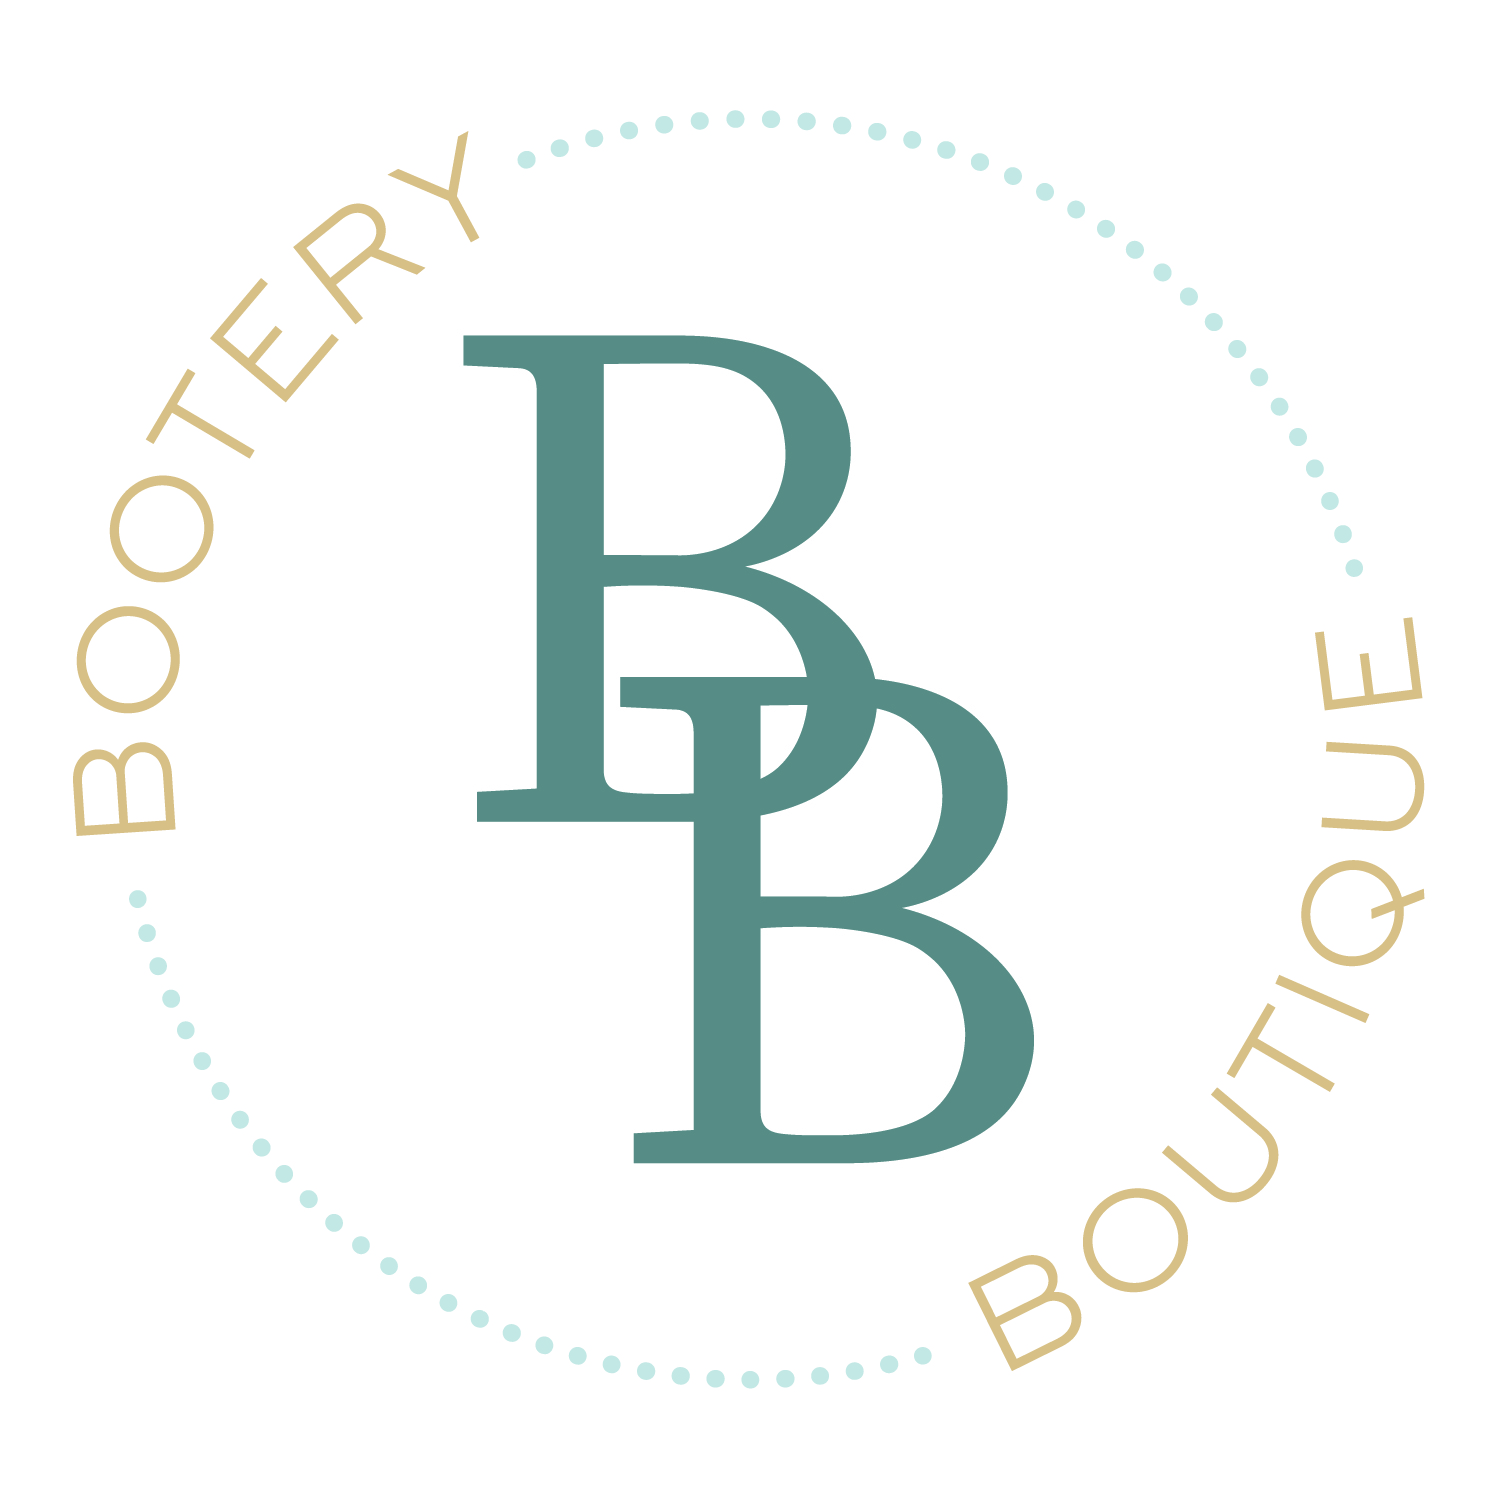 Bootery Boutique